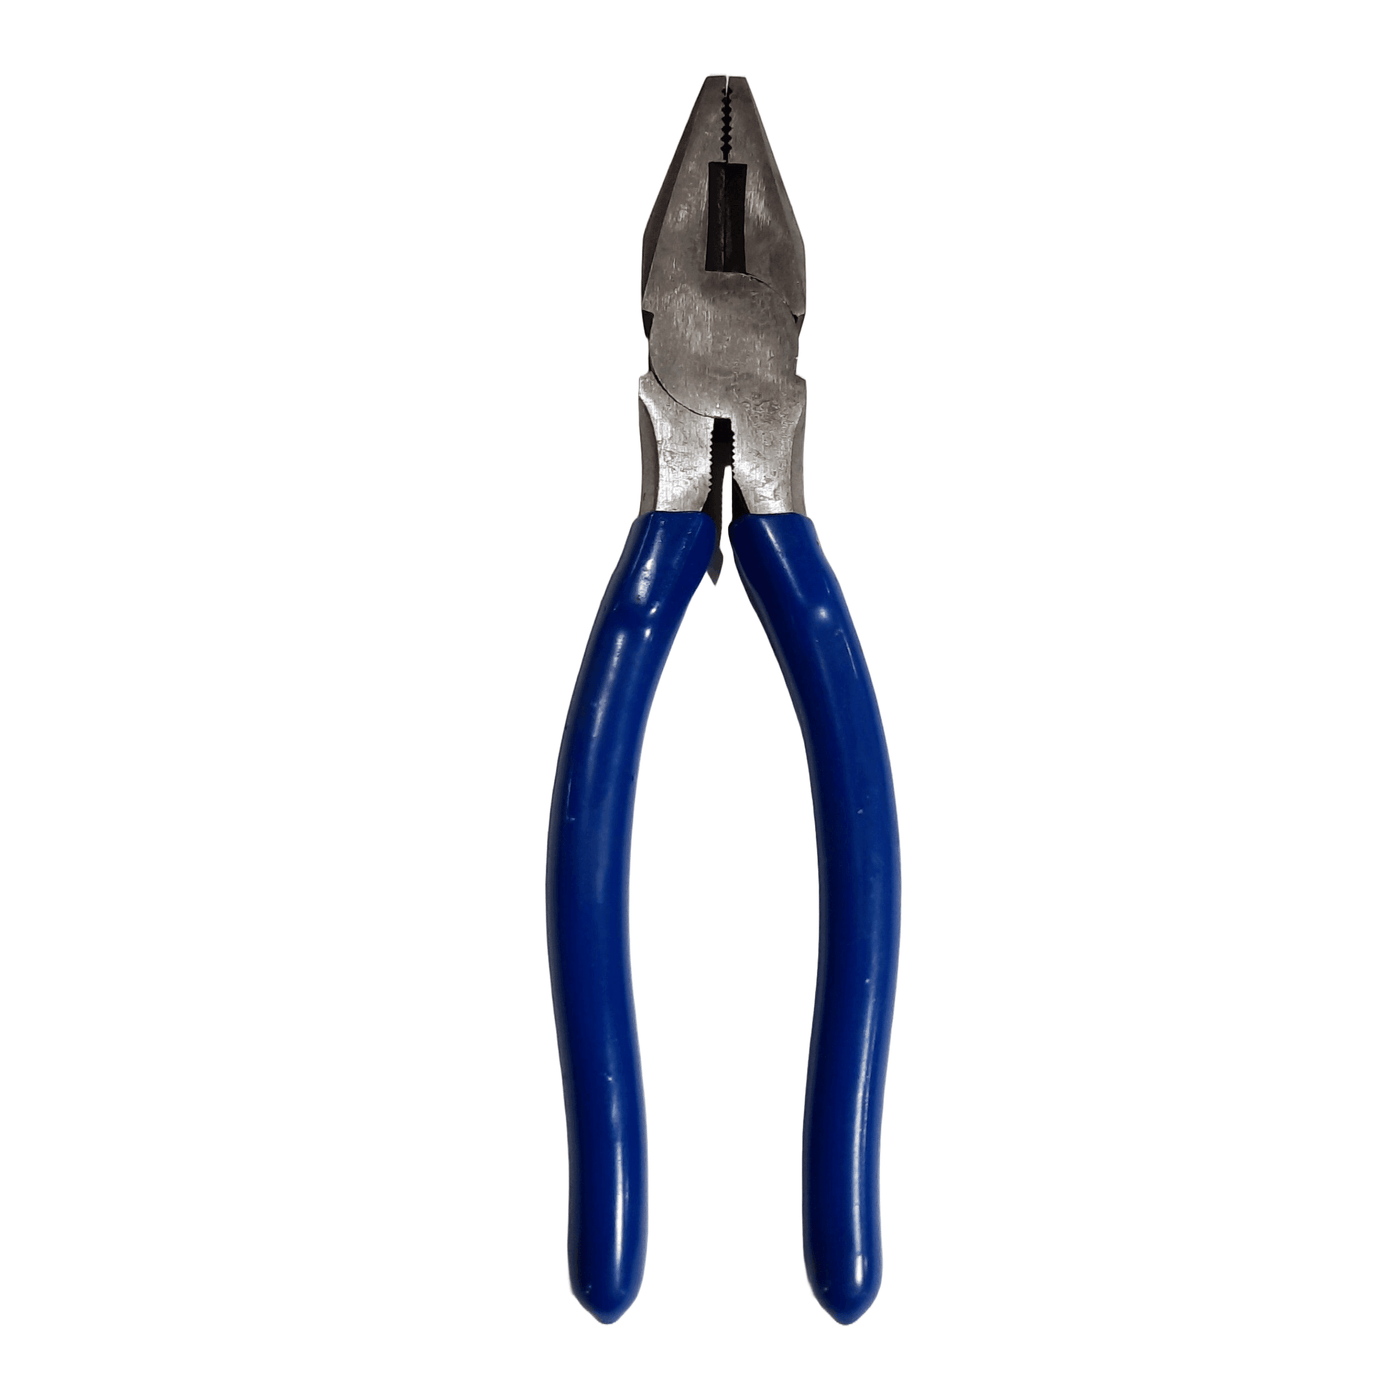 Trapper's Pliers - Trapping Supplies